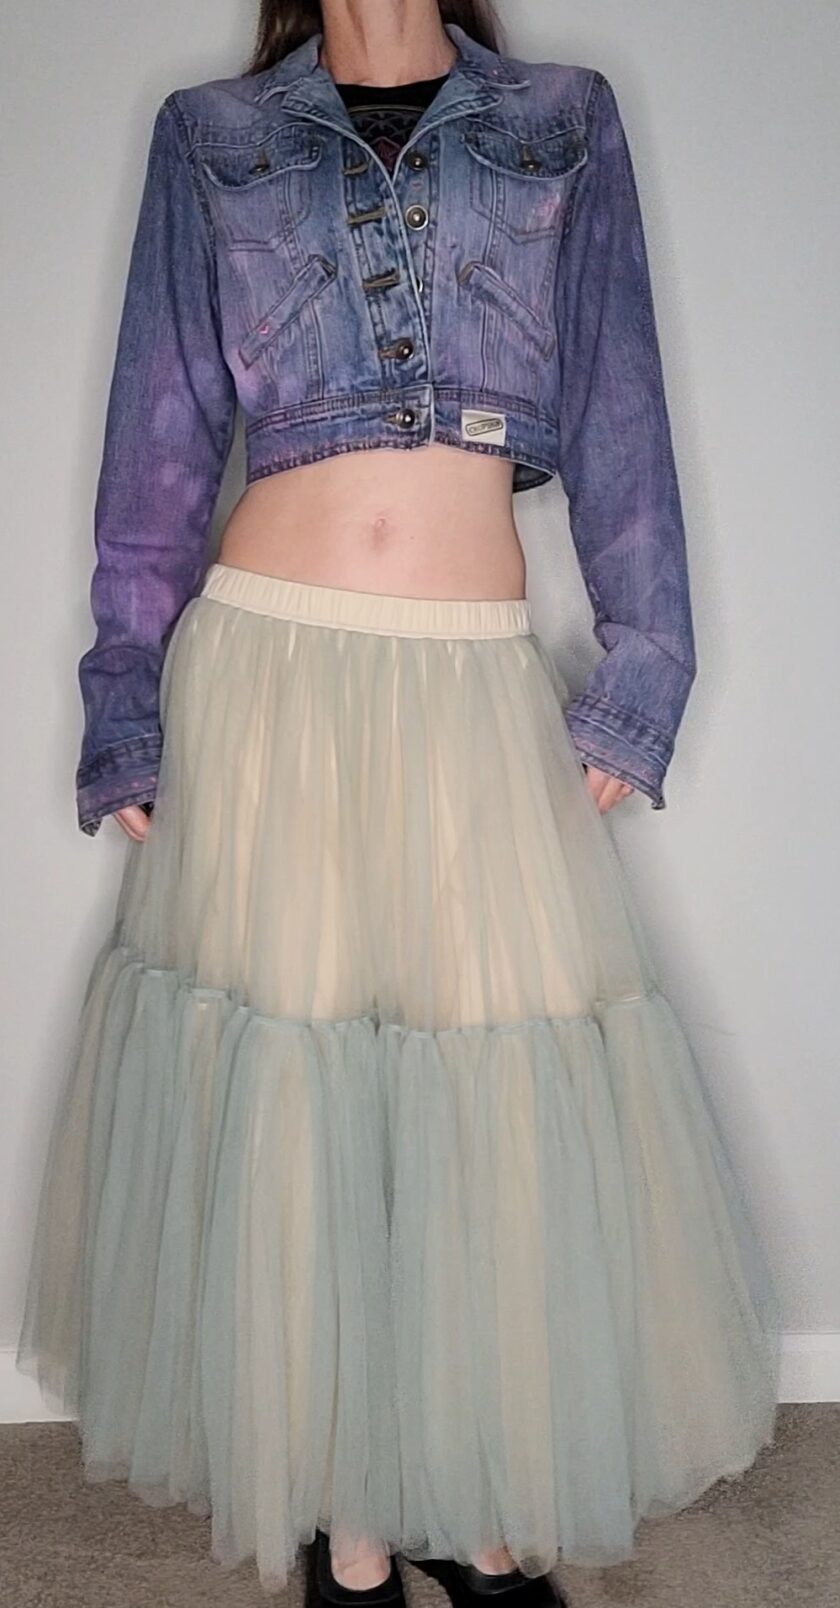 a woman wearing a denim jacket and a tulle skirt.